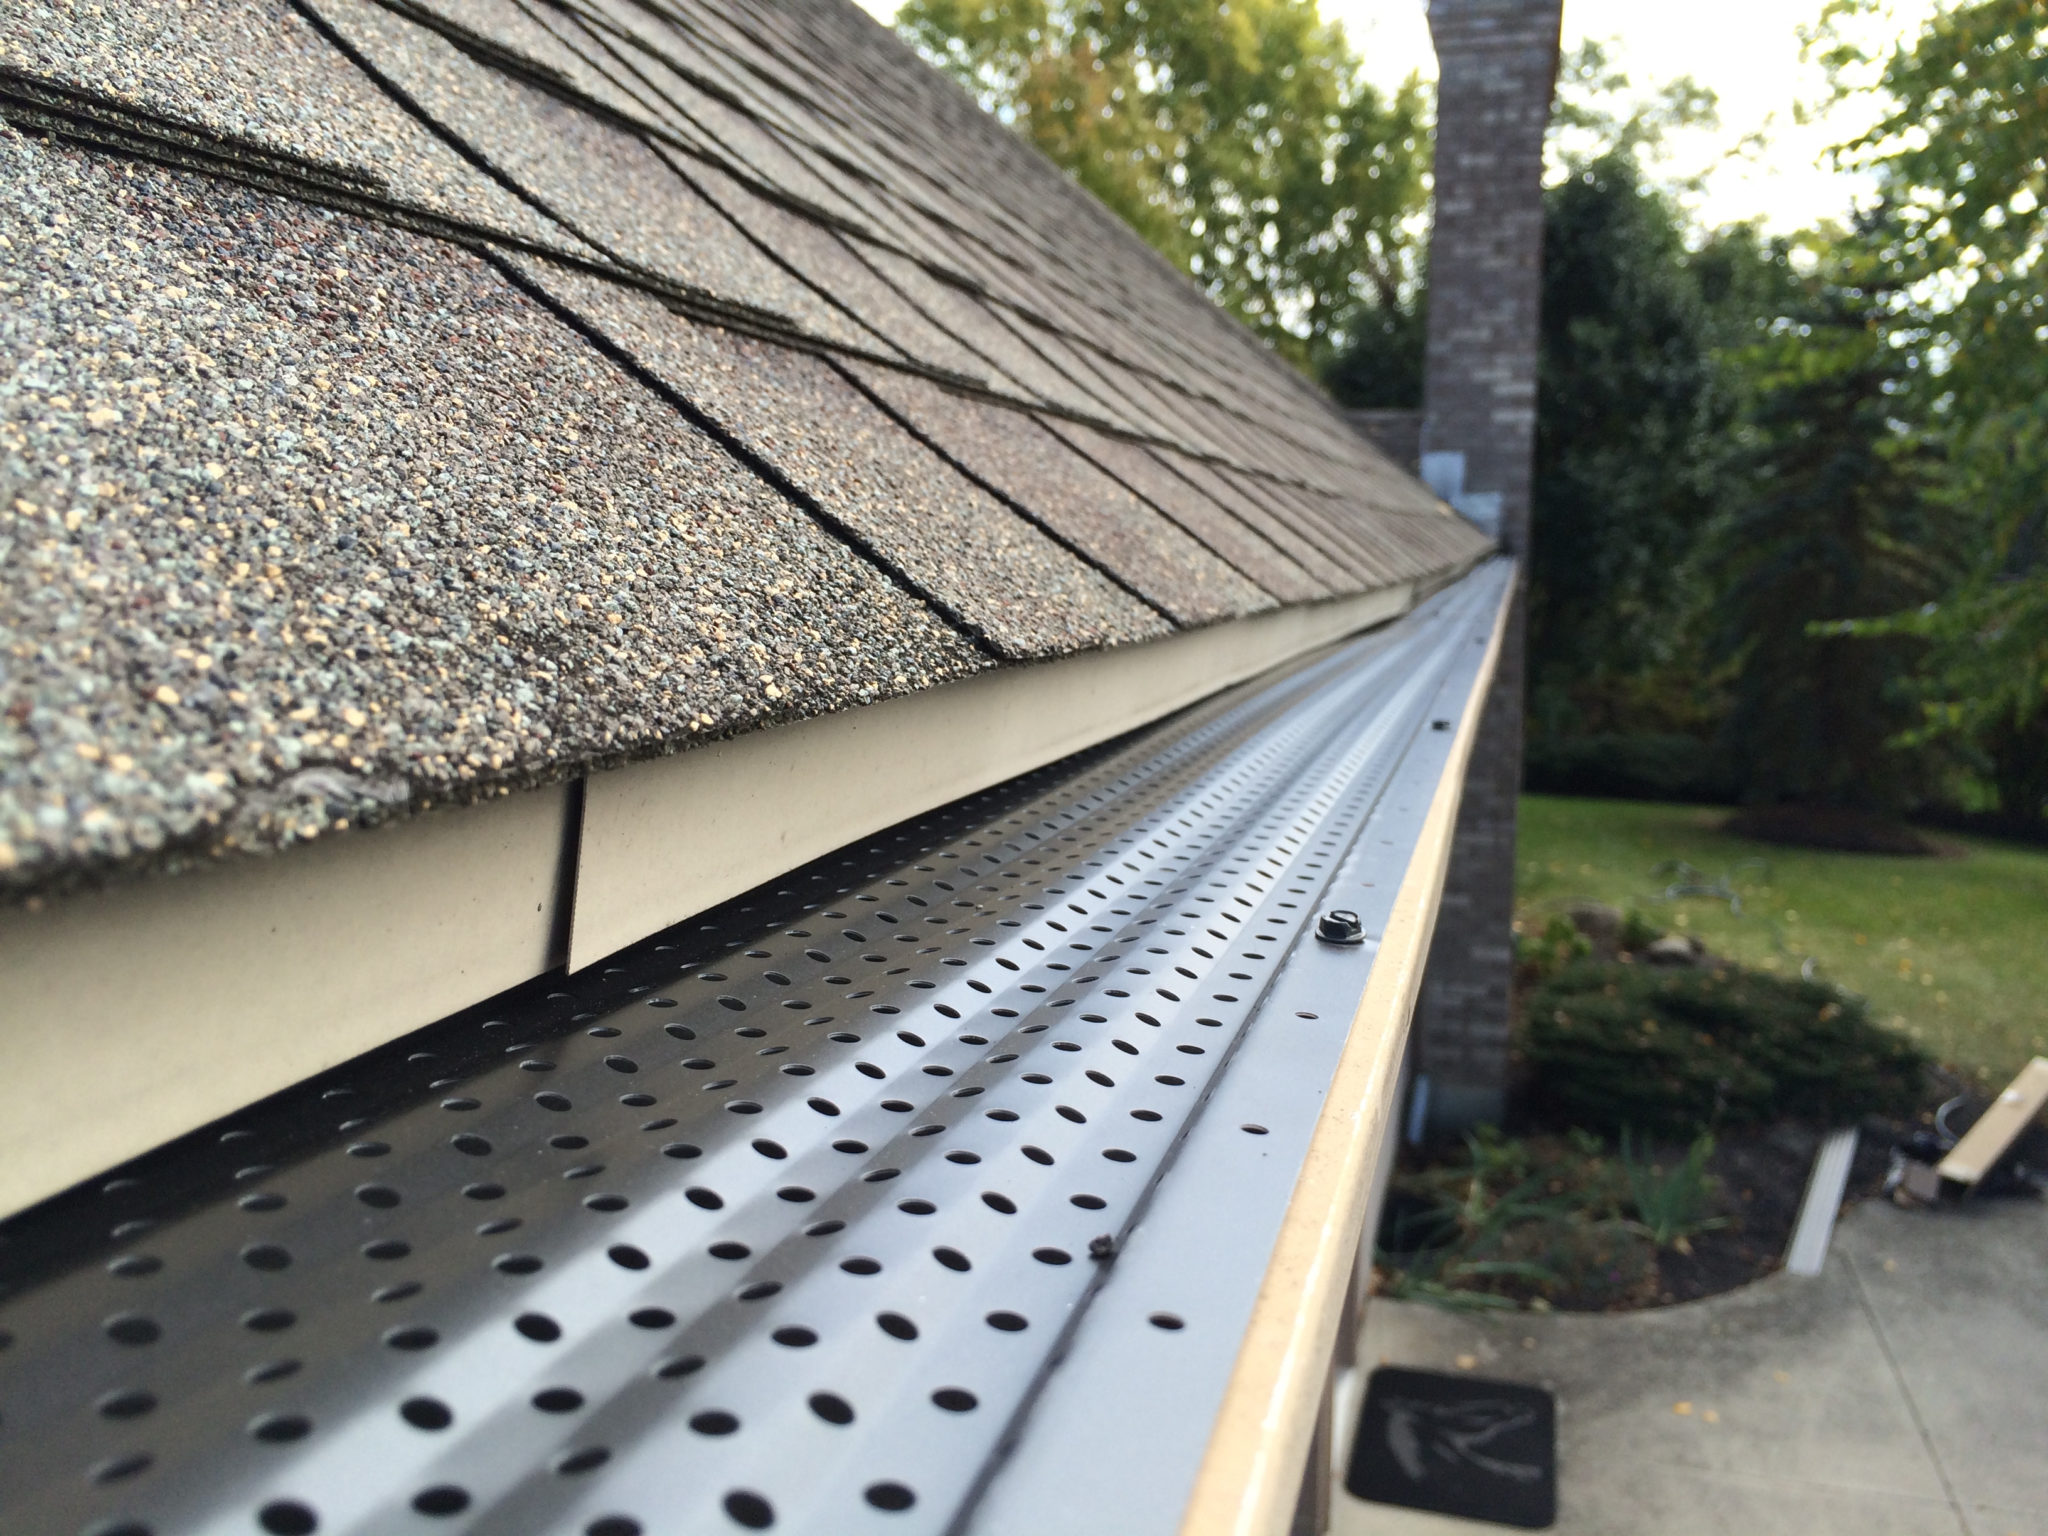 gutters with perforated gutter guards